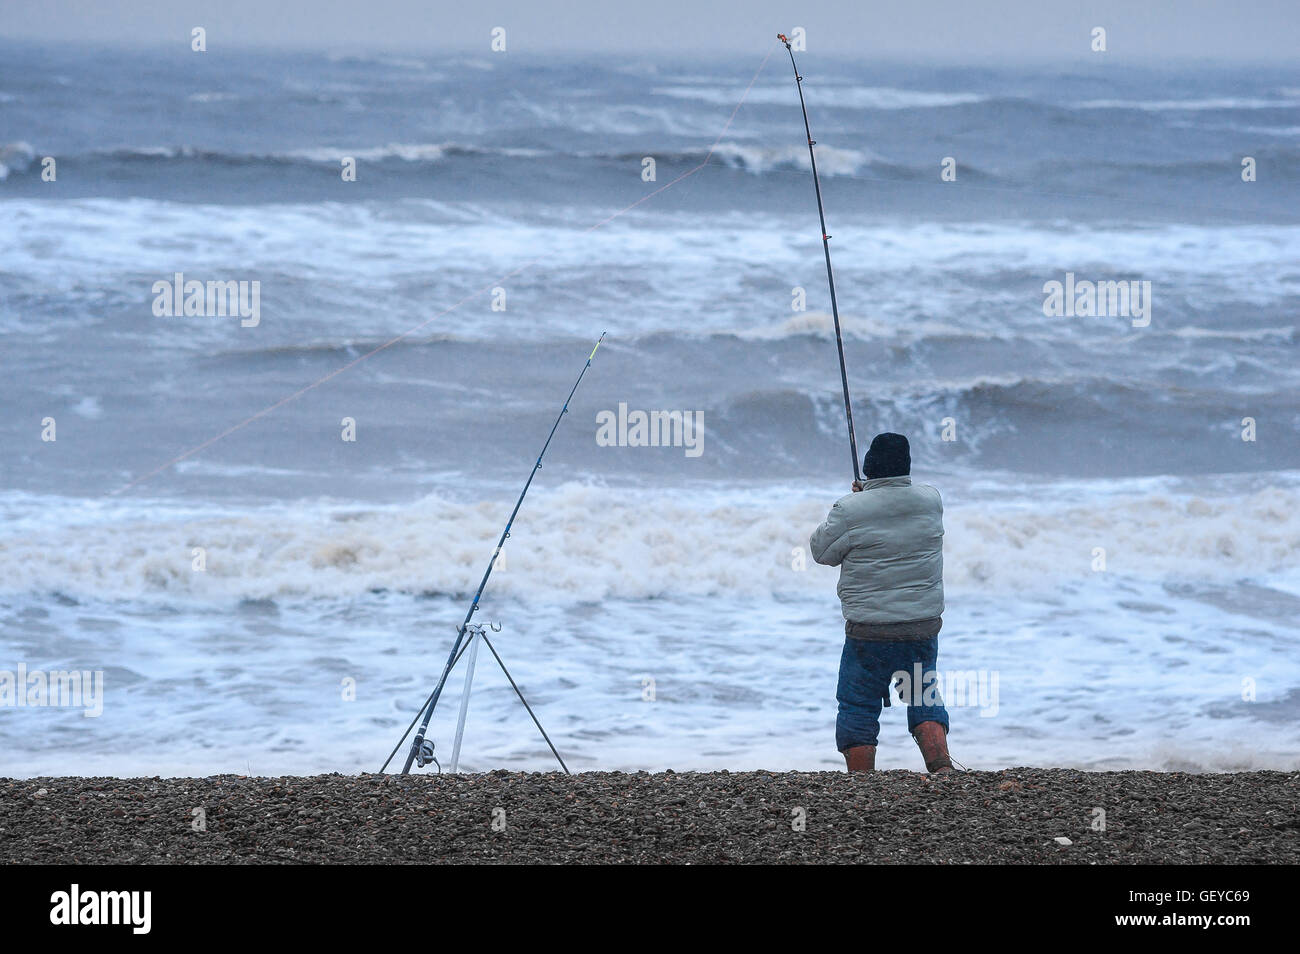 Man fishing stormy weather, rear view of a man fishing from the beach during rough weather at Dunwich on the Suffolk coast, England. Stock Photo